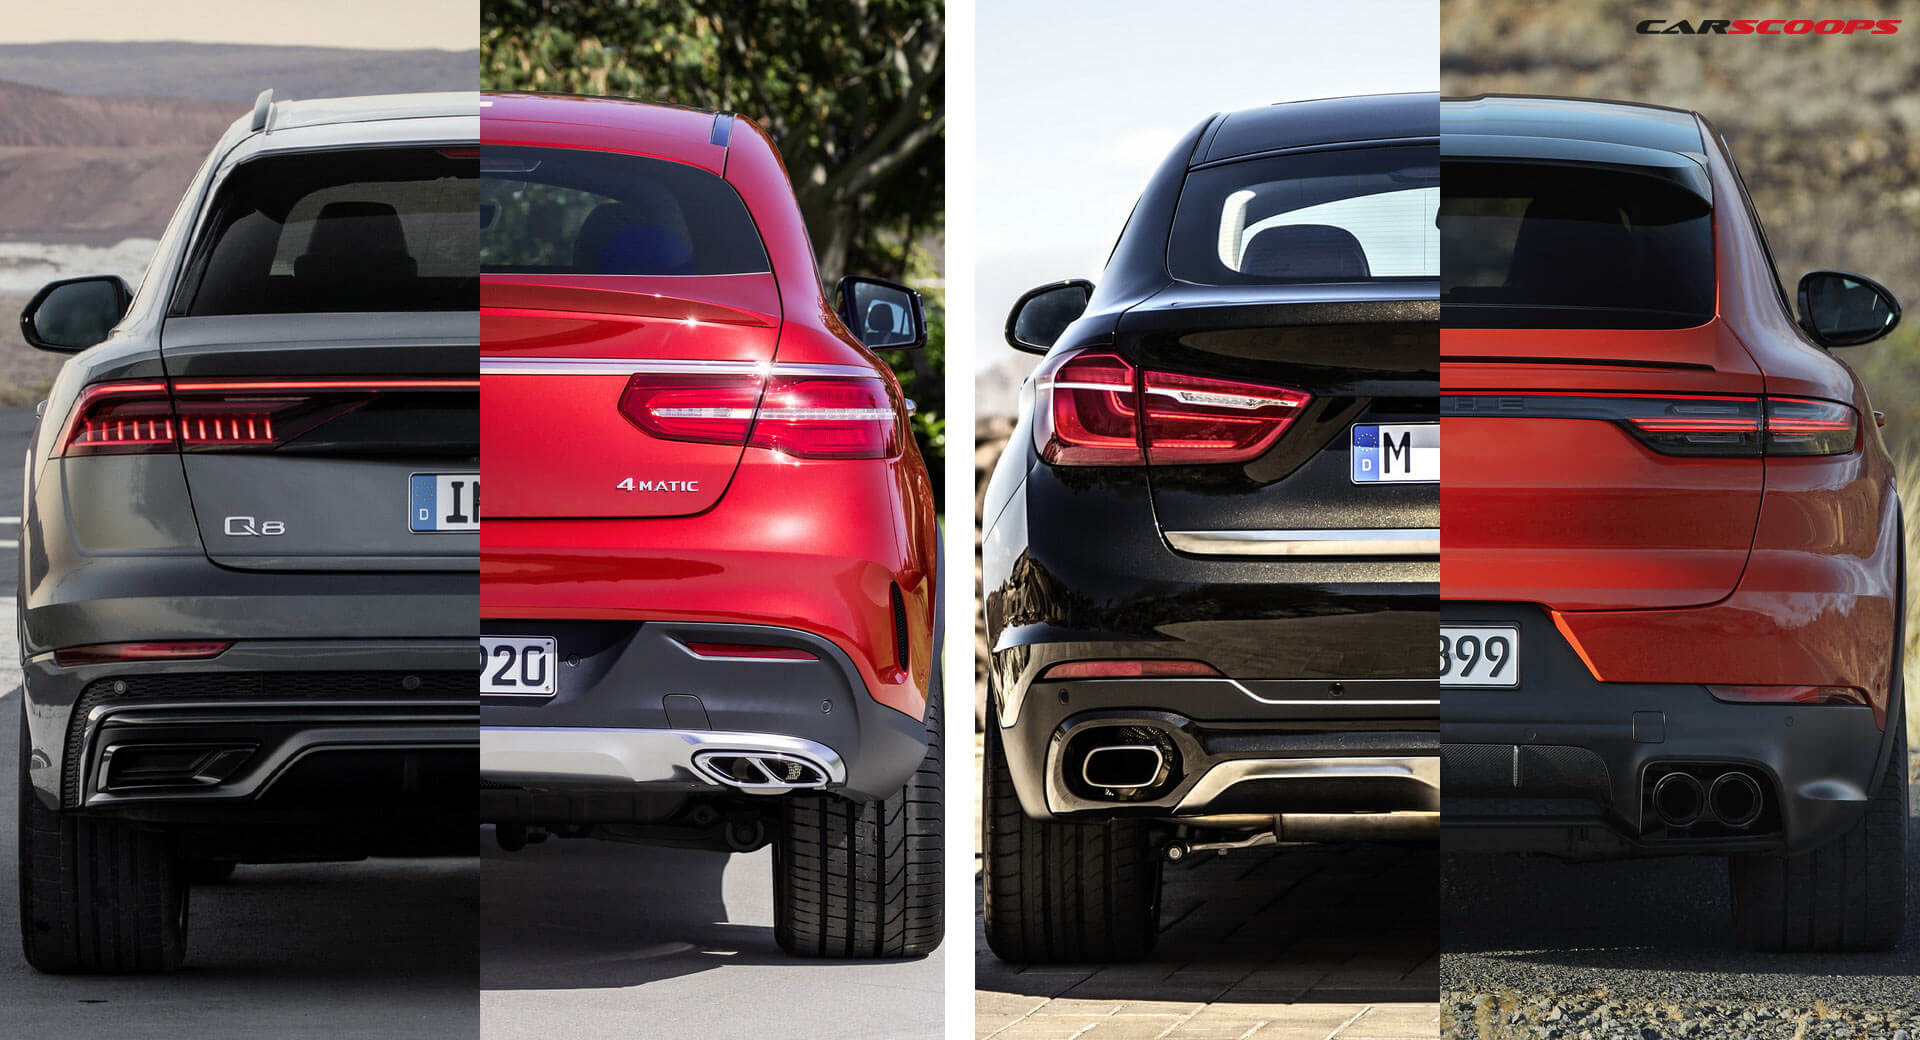 Porsche Cayenne Coupe vs. BMW X6 vs. Mercedes GLE Coupe vs. Audi Q8: Here’s How They Stack Up